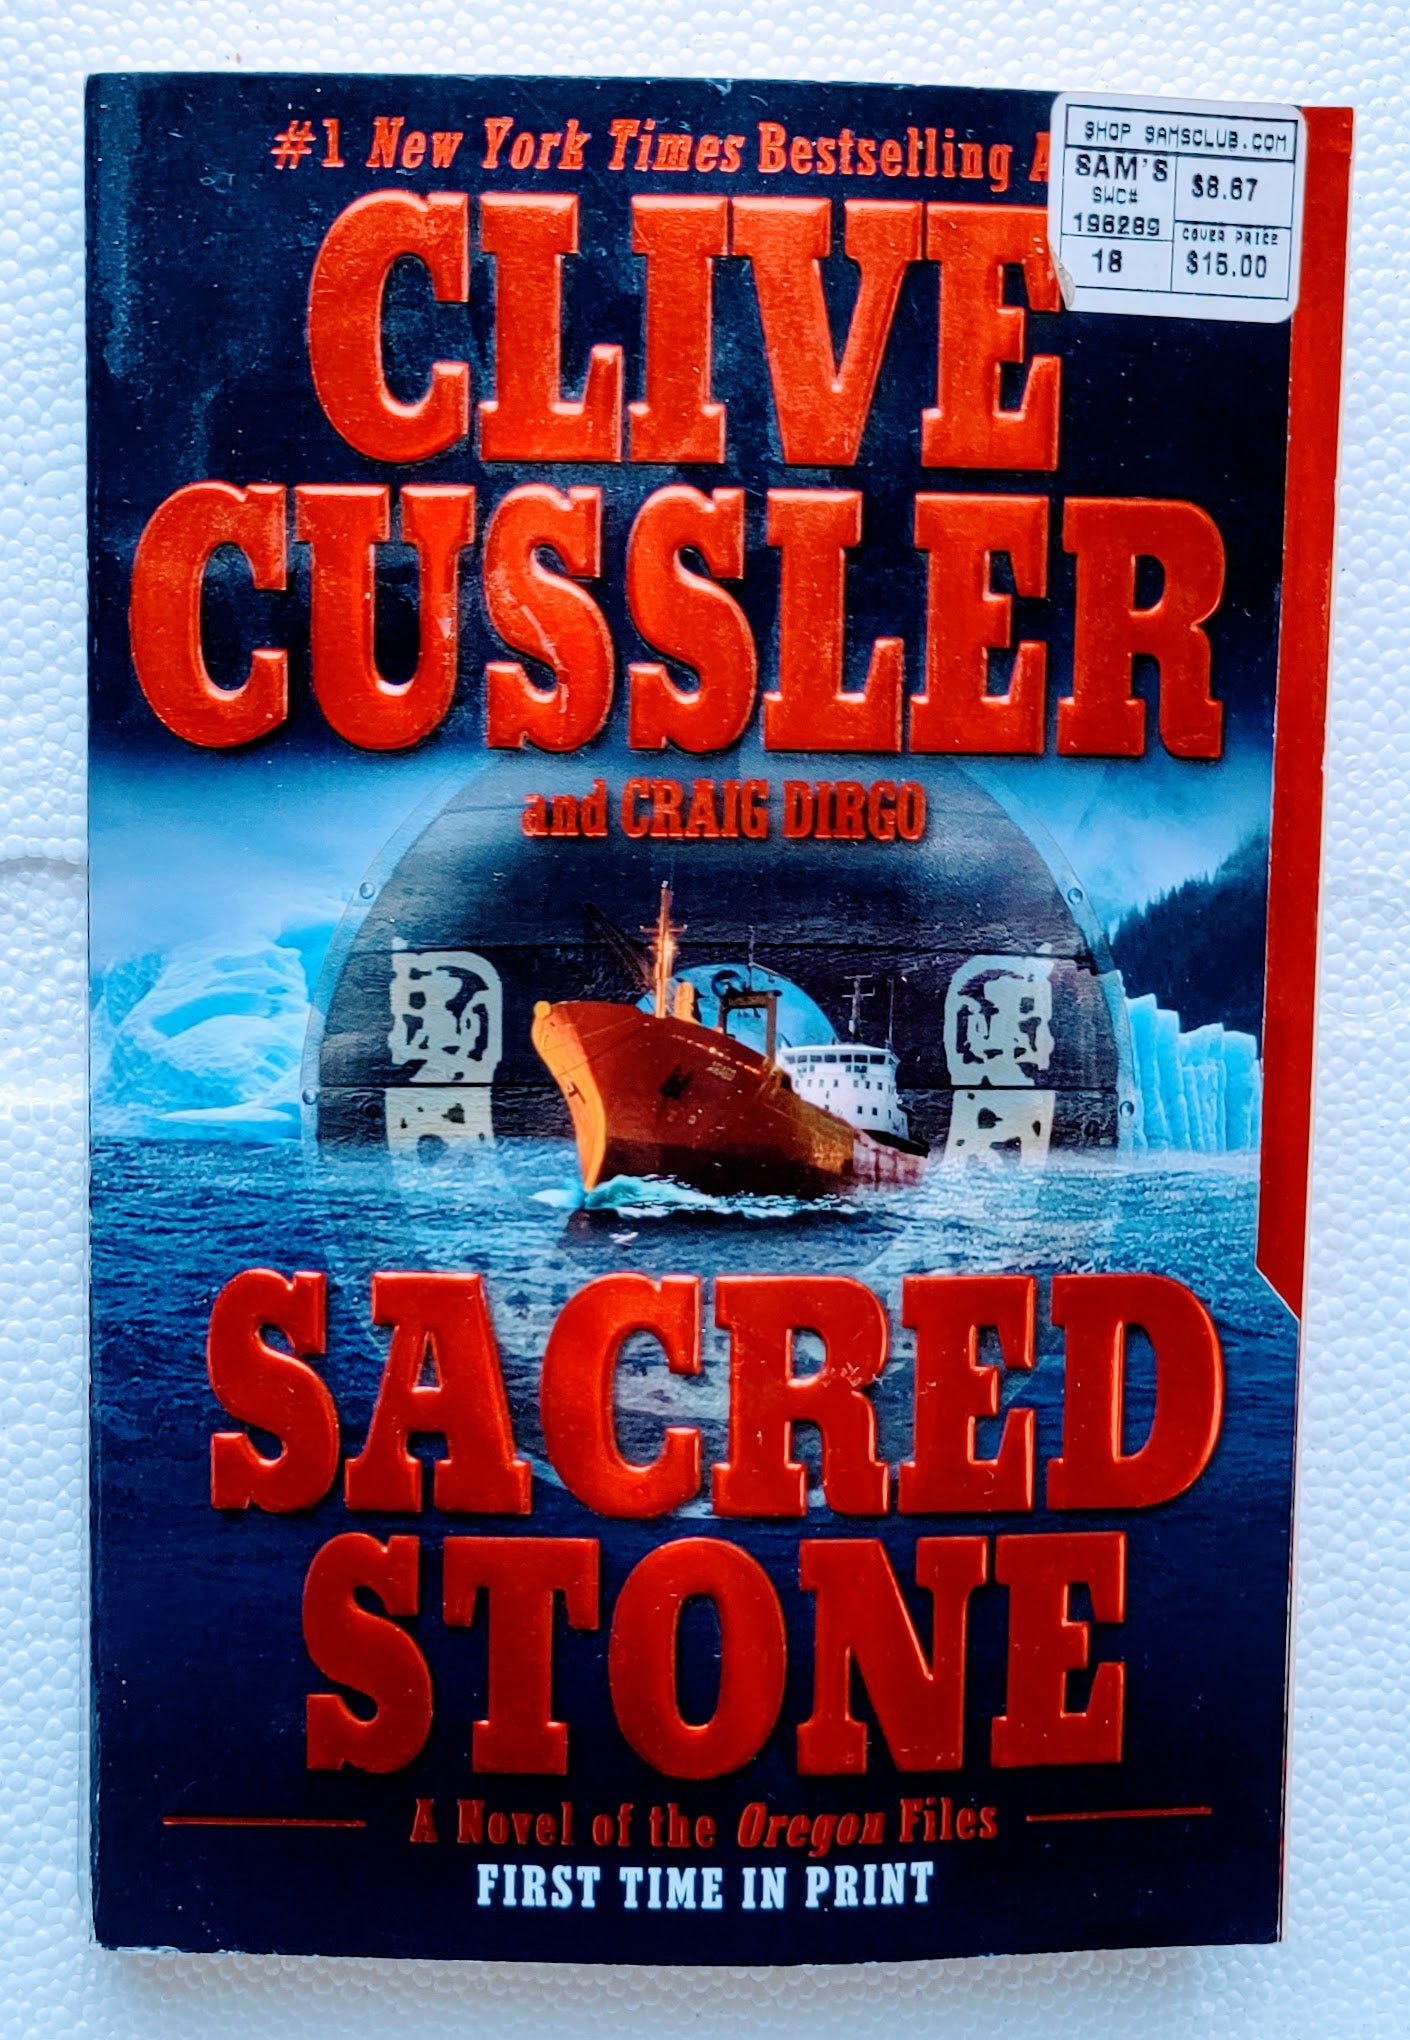 Sacred Stone: A Novel of the Oregon Files Novel Series Book by Clive Cussler and Craig Dirgo  Xclusive Collectibles   